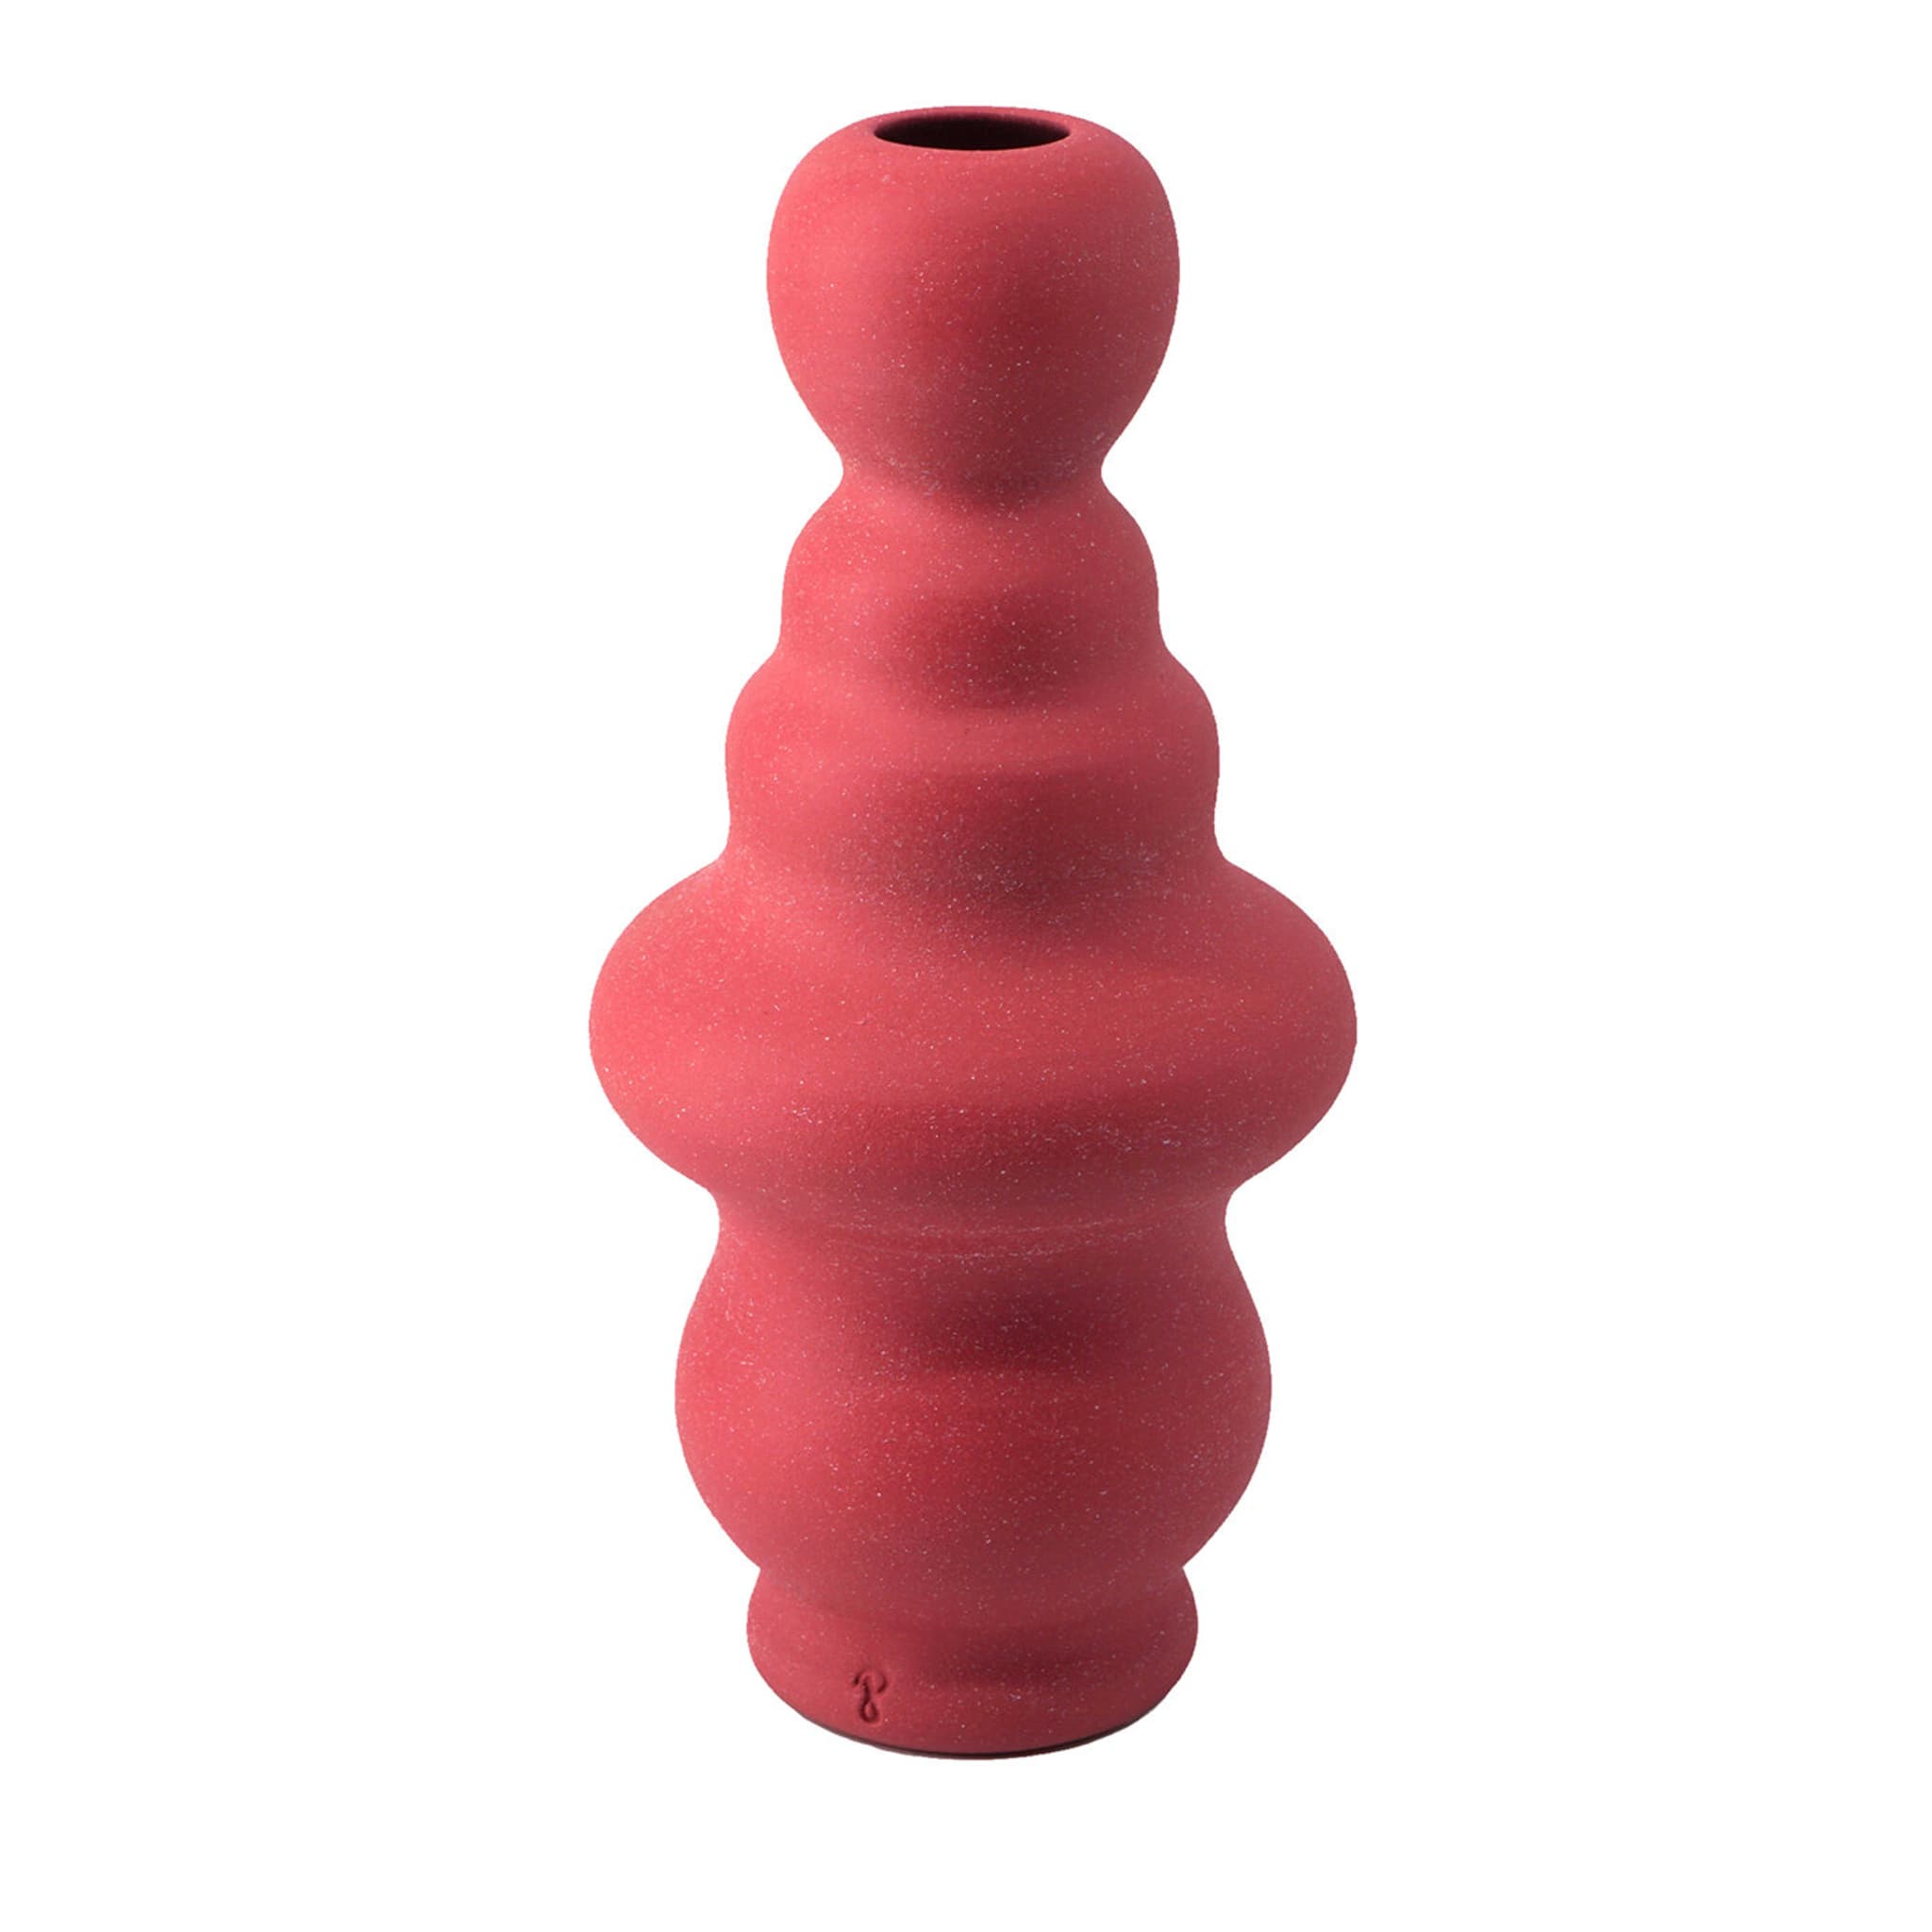 Crisalide Red Vase #5 - Main view